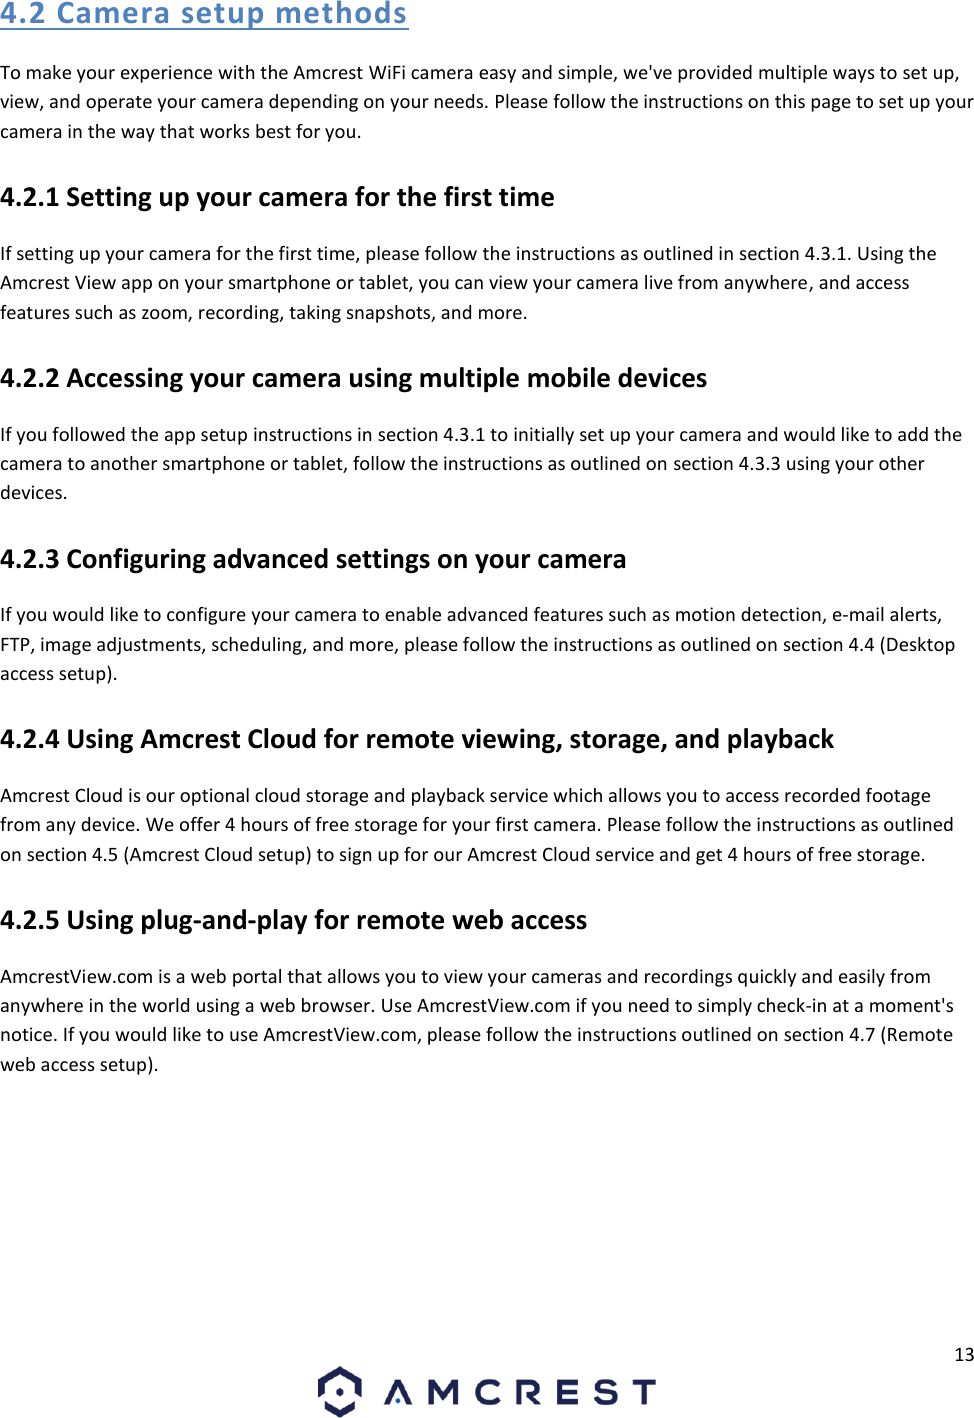 13  4.2 Camera setup methods To make your experience with the Amcrest WiFi camera easy and simple, we&apos;ve provided multiple ways to set up, view, and operate your camera depending on your needs. Please follow the instructions on this page to set up your camera in the way that works best for you. 4.2.1 Setting up your camera for the first time If setting up your camera for the first time, please follow the instructions as outlined in section 4.3.1. Using the Amcrest View app on your smartphone or tablet, you can view your camera live from anywhere, and access features such as zoom, recording, taking snapshots, and more. 4.2.2 Accessing your camera using multiple mobile devices If you followed the app setup instructions in section 4.3.1 to initially set up your camera and would like to add the camera to another smartphone or tablet, follow the instructions as outlined on section 4.3.3 using your other devices. 4.2.3 Configuring advanced settings on your camera If you would like to configure your camera to enable advanced features such as motion detection, e-mail alerts, FTP, image adjustments, scheduling, and more, please follow the instructions as outlined on section 4.4 (Desktop access setup). 4.2.4 Using Amcrest Cloud for remote viewing, storage, and playback Amcrest Cloud is our optional cloud storage and playback service which allows you to access recorded footage from any device. We offer 4 hours of free storage for your first camera. Please follow the instructions as outlined on section 4.5 (Amcrest Cloud setup) to sign up for our Amcrest Cloud service and get 4 hours of free storage. 4.2.5 Using plug-and-play for remote web access AmcrestView.com is a web portal that allows you to view your cameras and recordings quickly and easily from anywhere in the world using a web browser. Use AmcrestView.com if you need to simply check-in at a moment&apos;s notice. If you would like to use AmcrestView.com, please follow the instructions outlined on section 4.7 (Remote web access setup).    